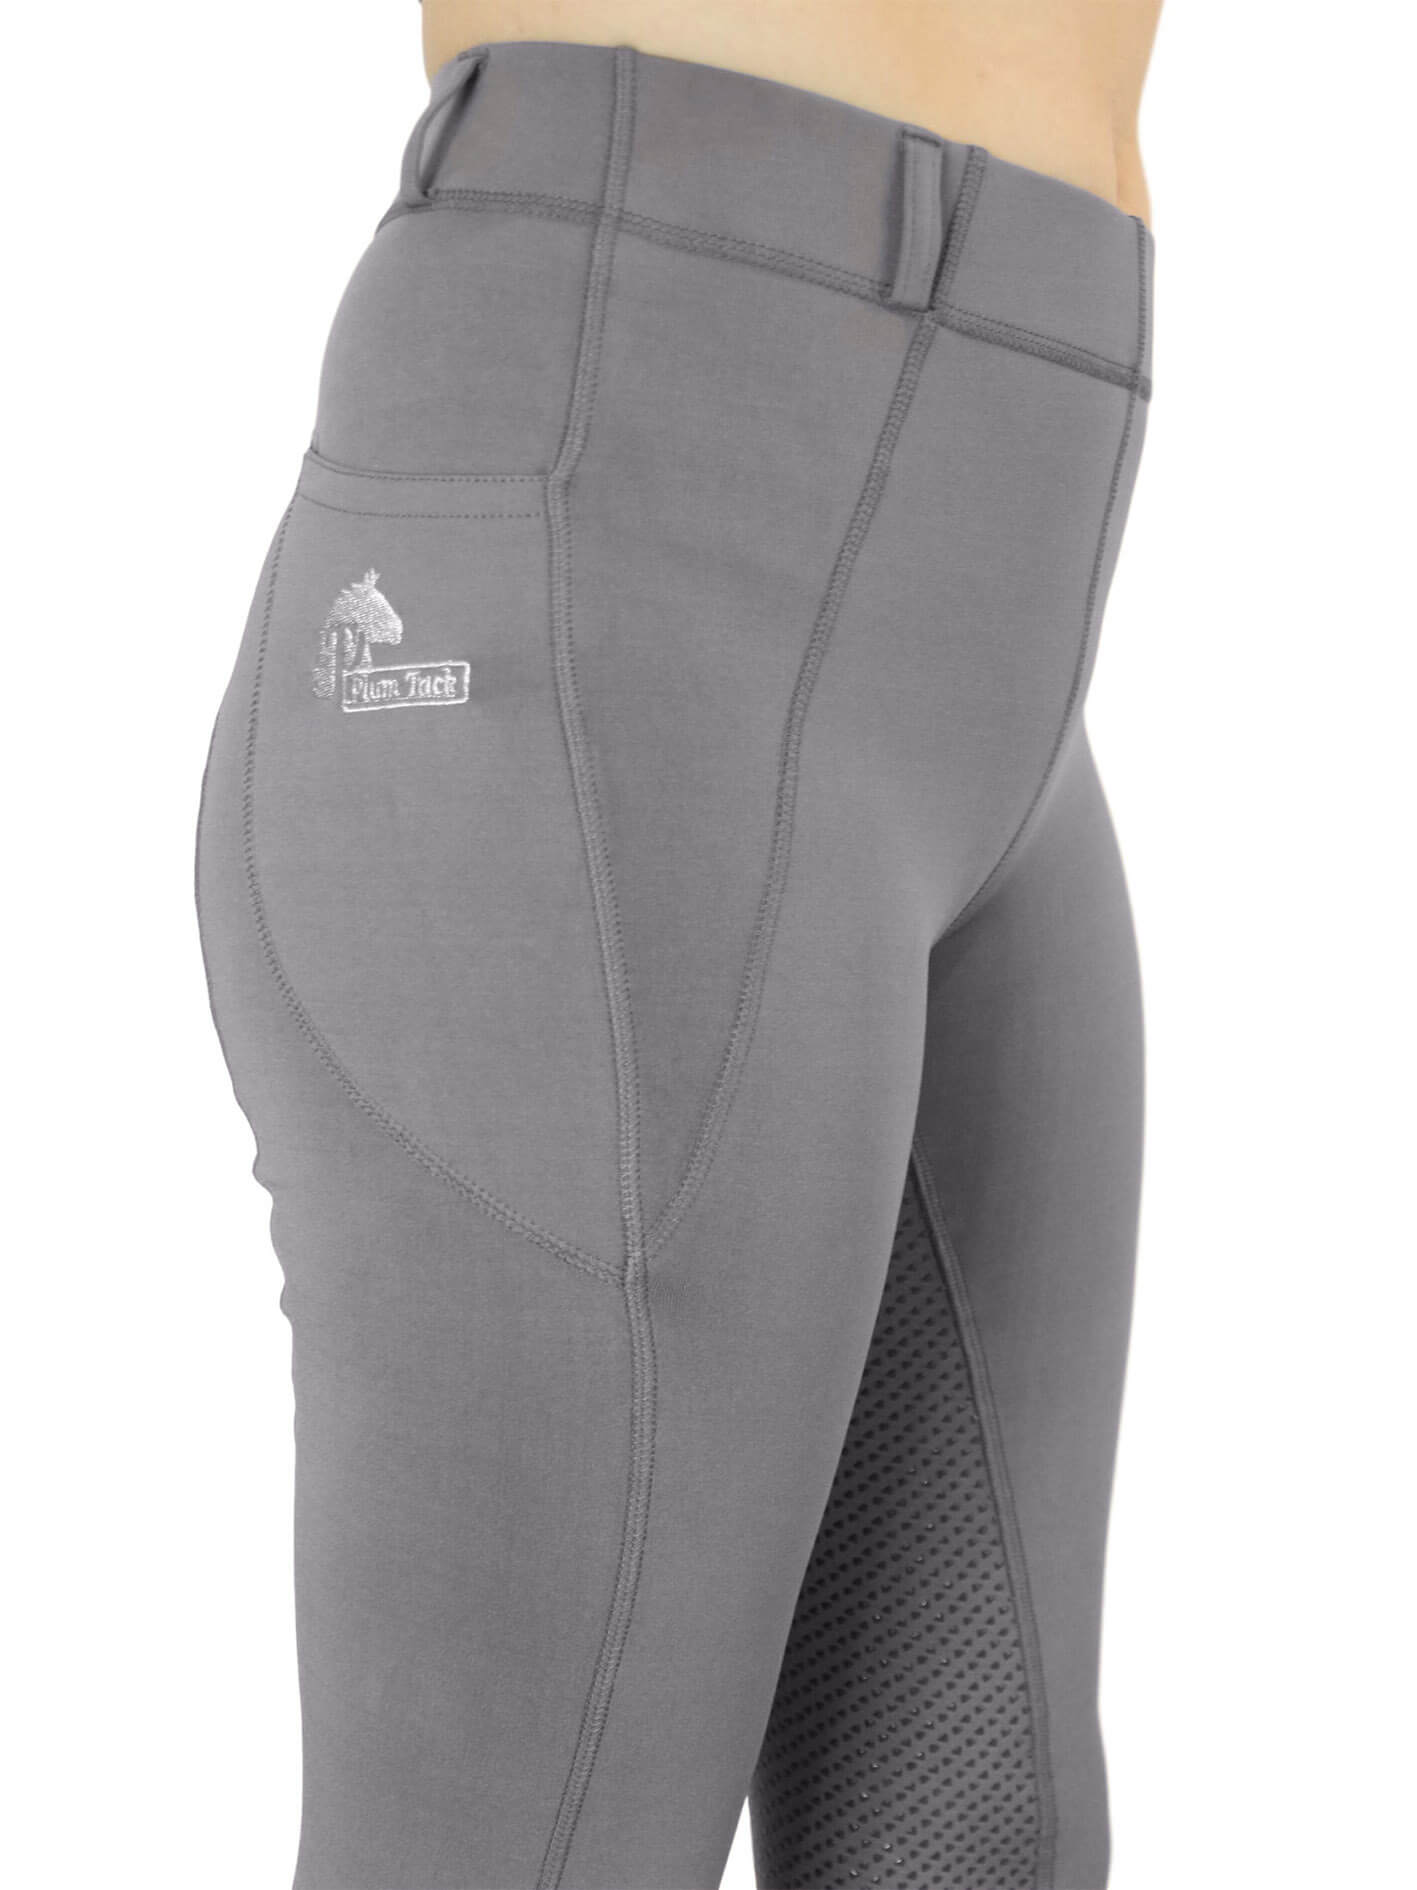 Person wearing gray horse riding tights with a logo on them.